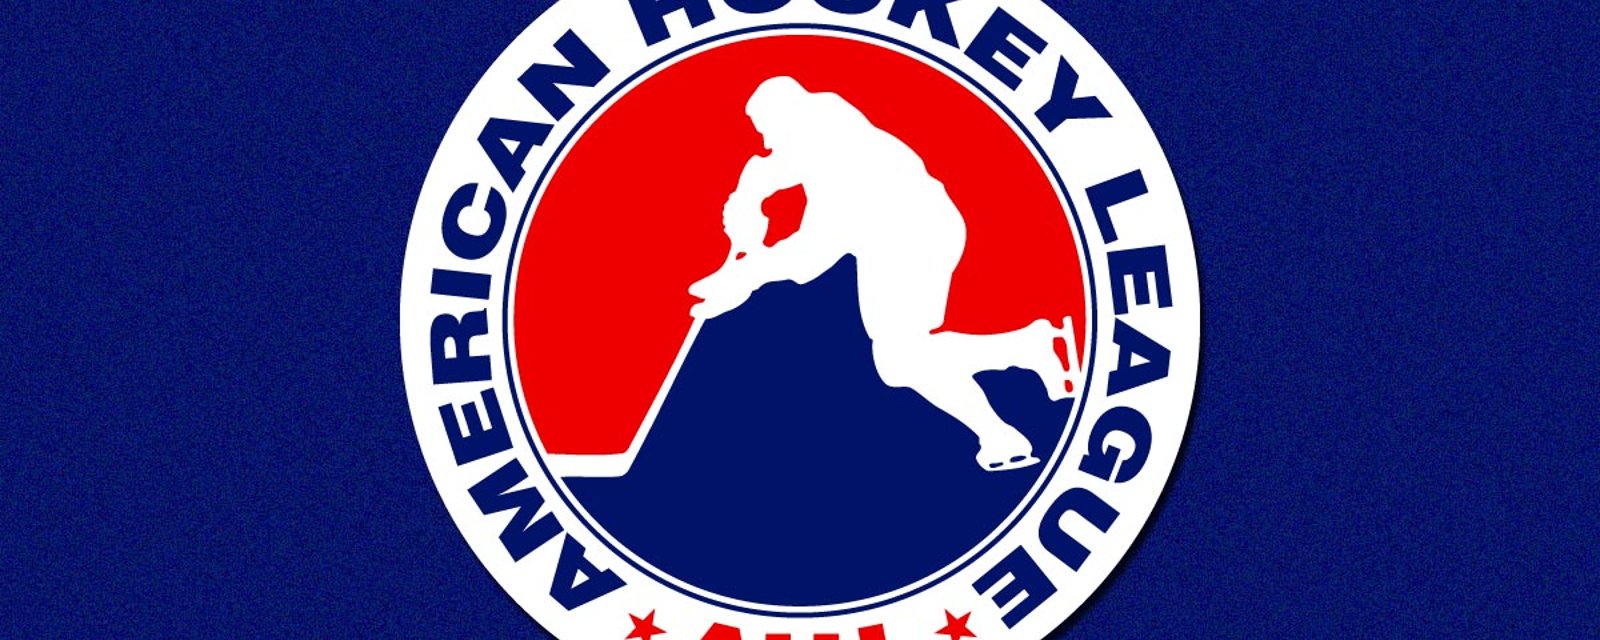 AHL releases update, tells players to go home